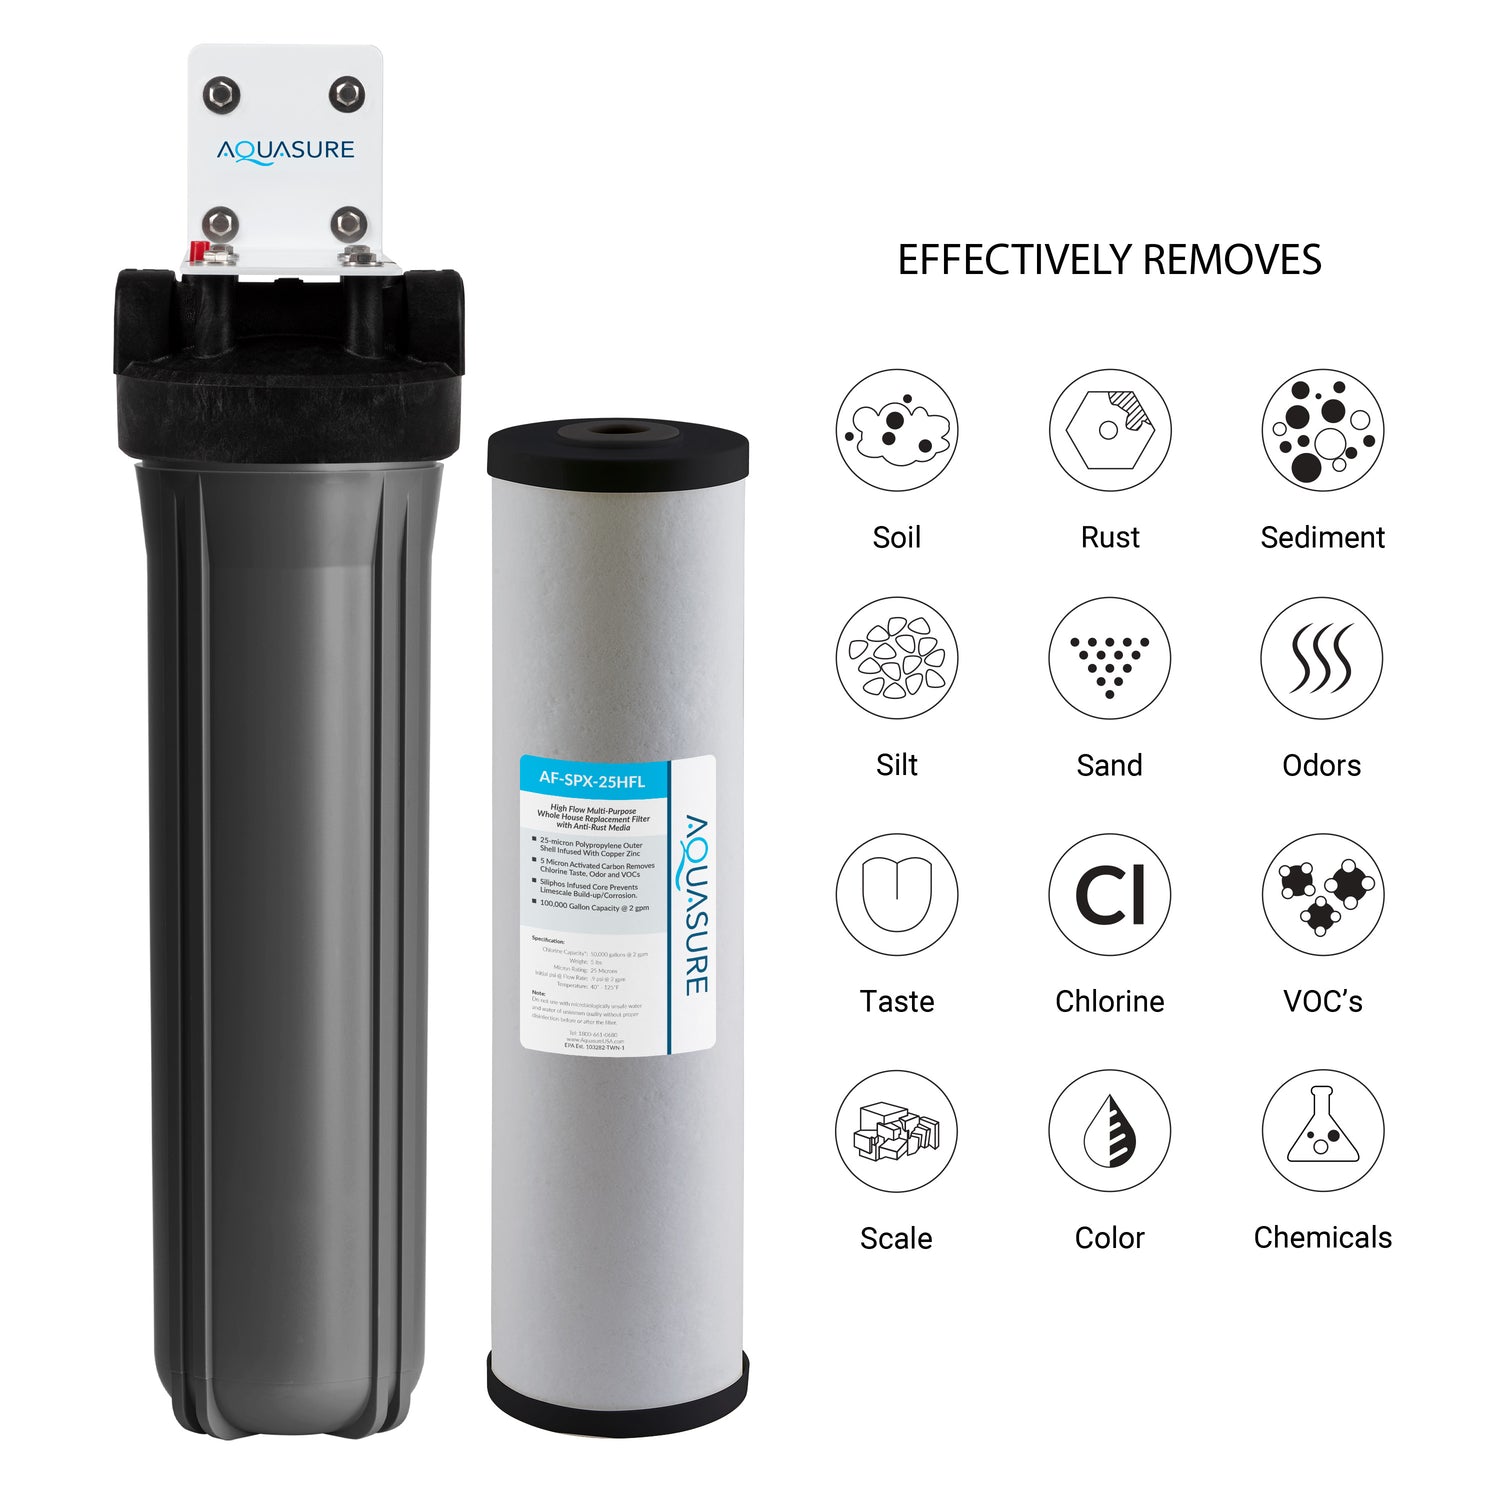 Fortitude V2 Series Multi-purpose Whole House Water Treatment System with Siliphos - Large Size